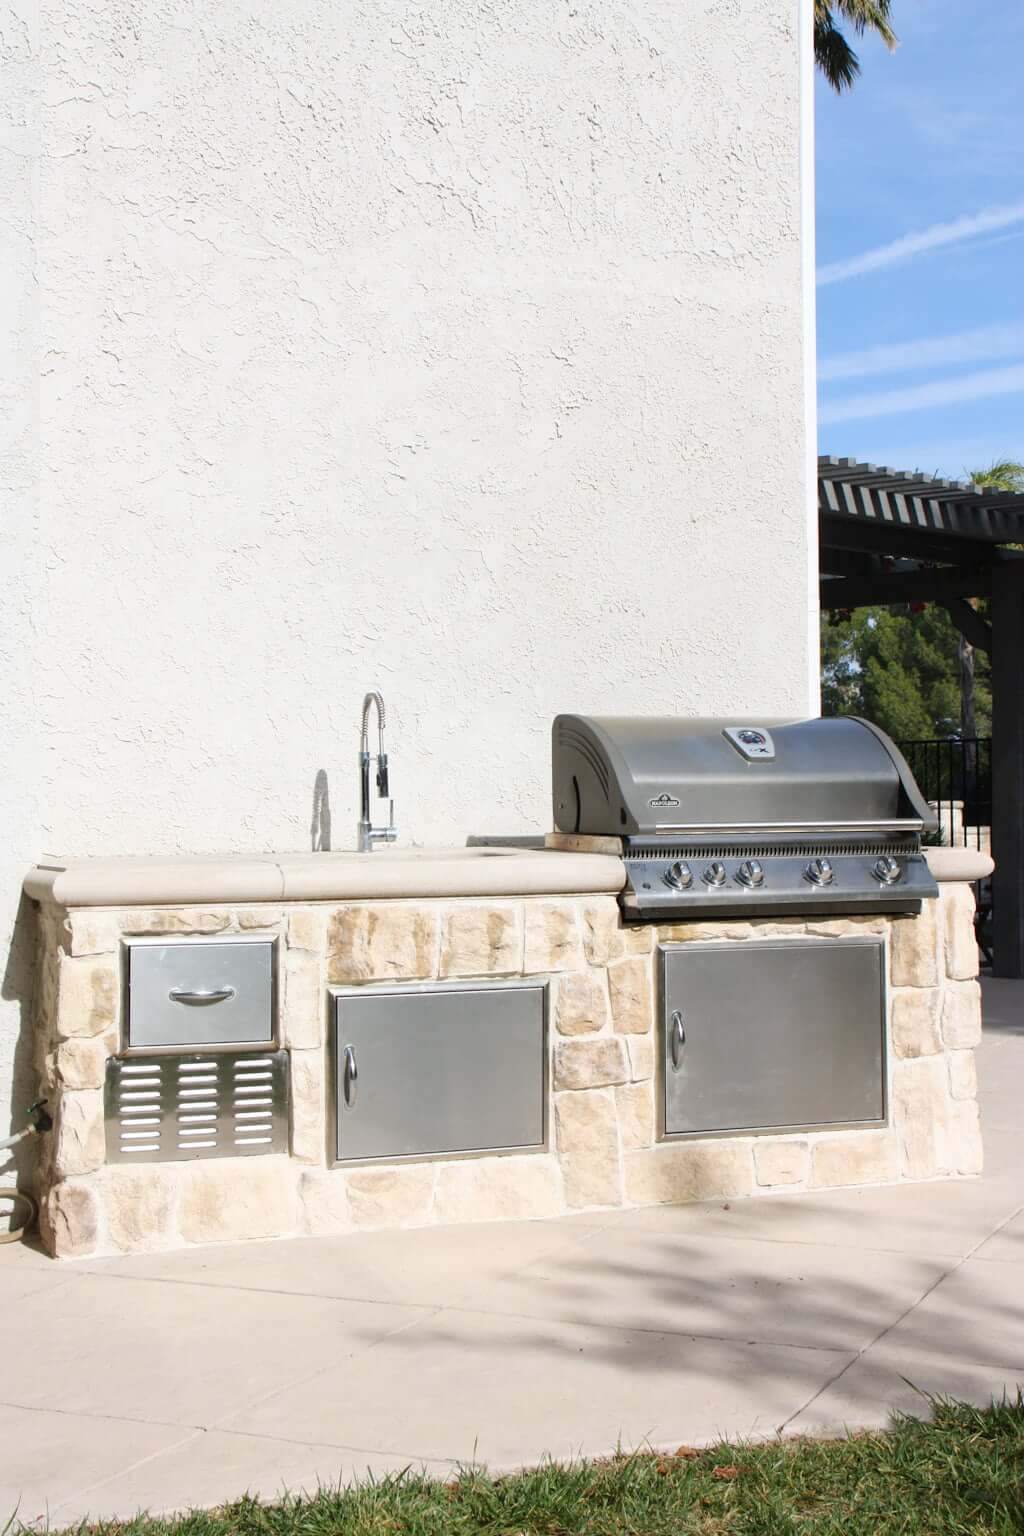 Small backyard kitchen with outdoor built in grill and small outdoor kitchen sink and stainless steel outdoor cabinets